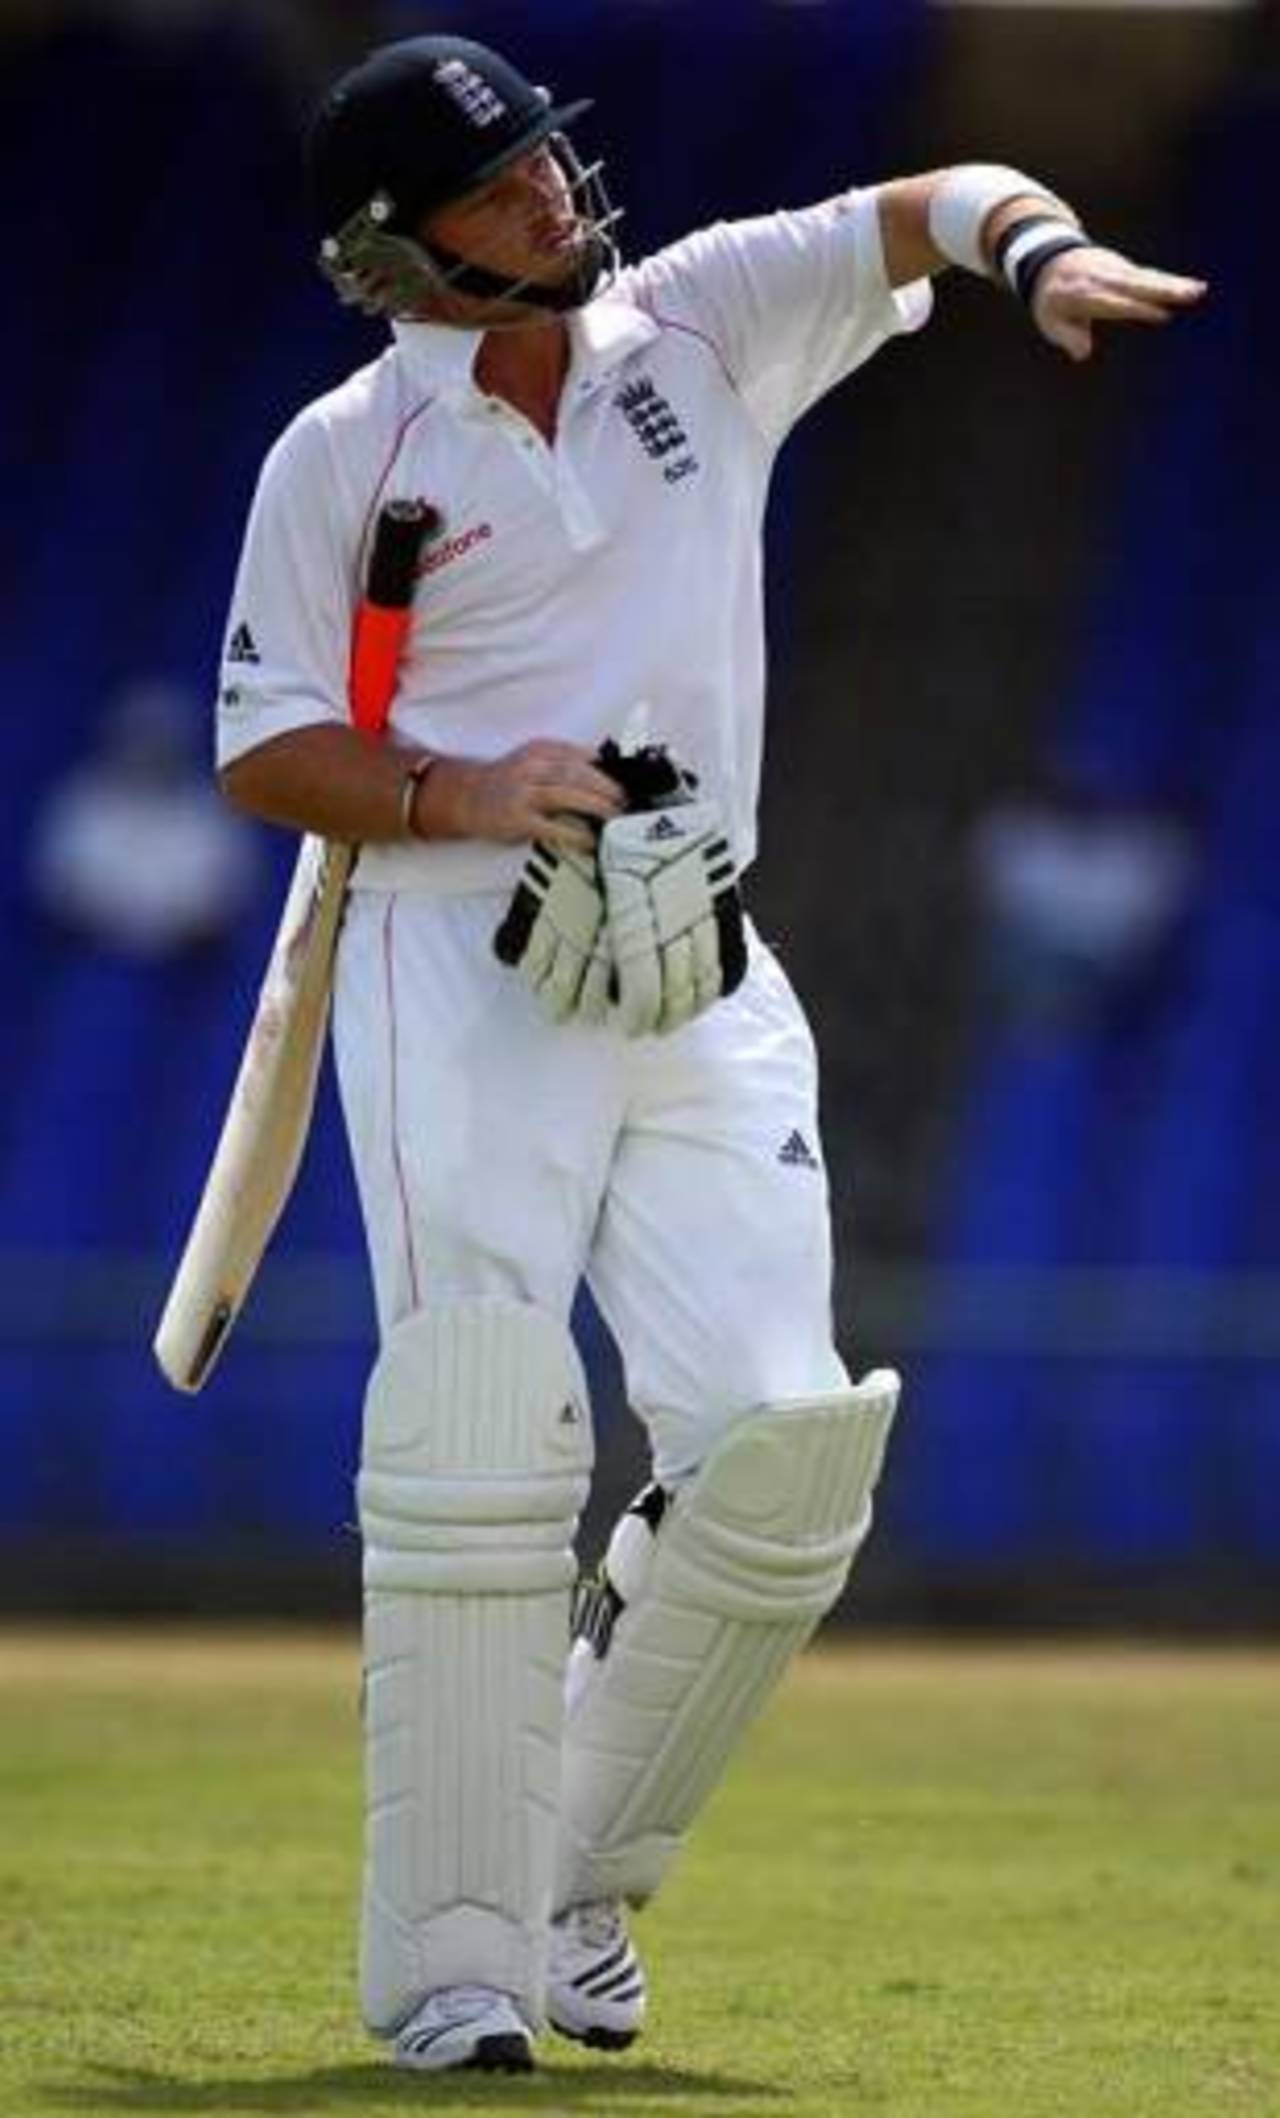 That's how I should have played it: Ian Bell after being caught and bowled for 36, St Kitts & Nevis XI v England XI, Warner Park, January 25, 2009